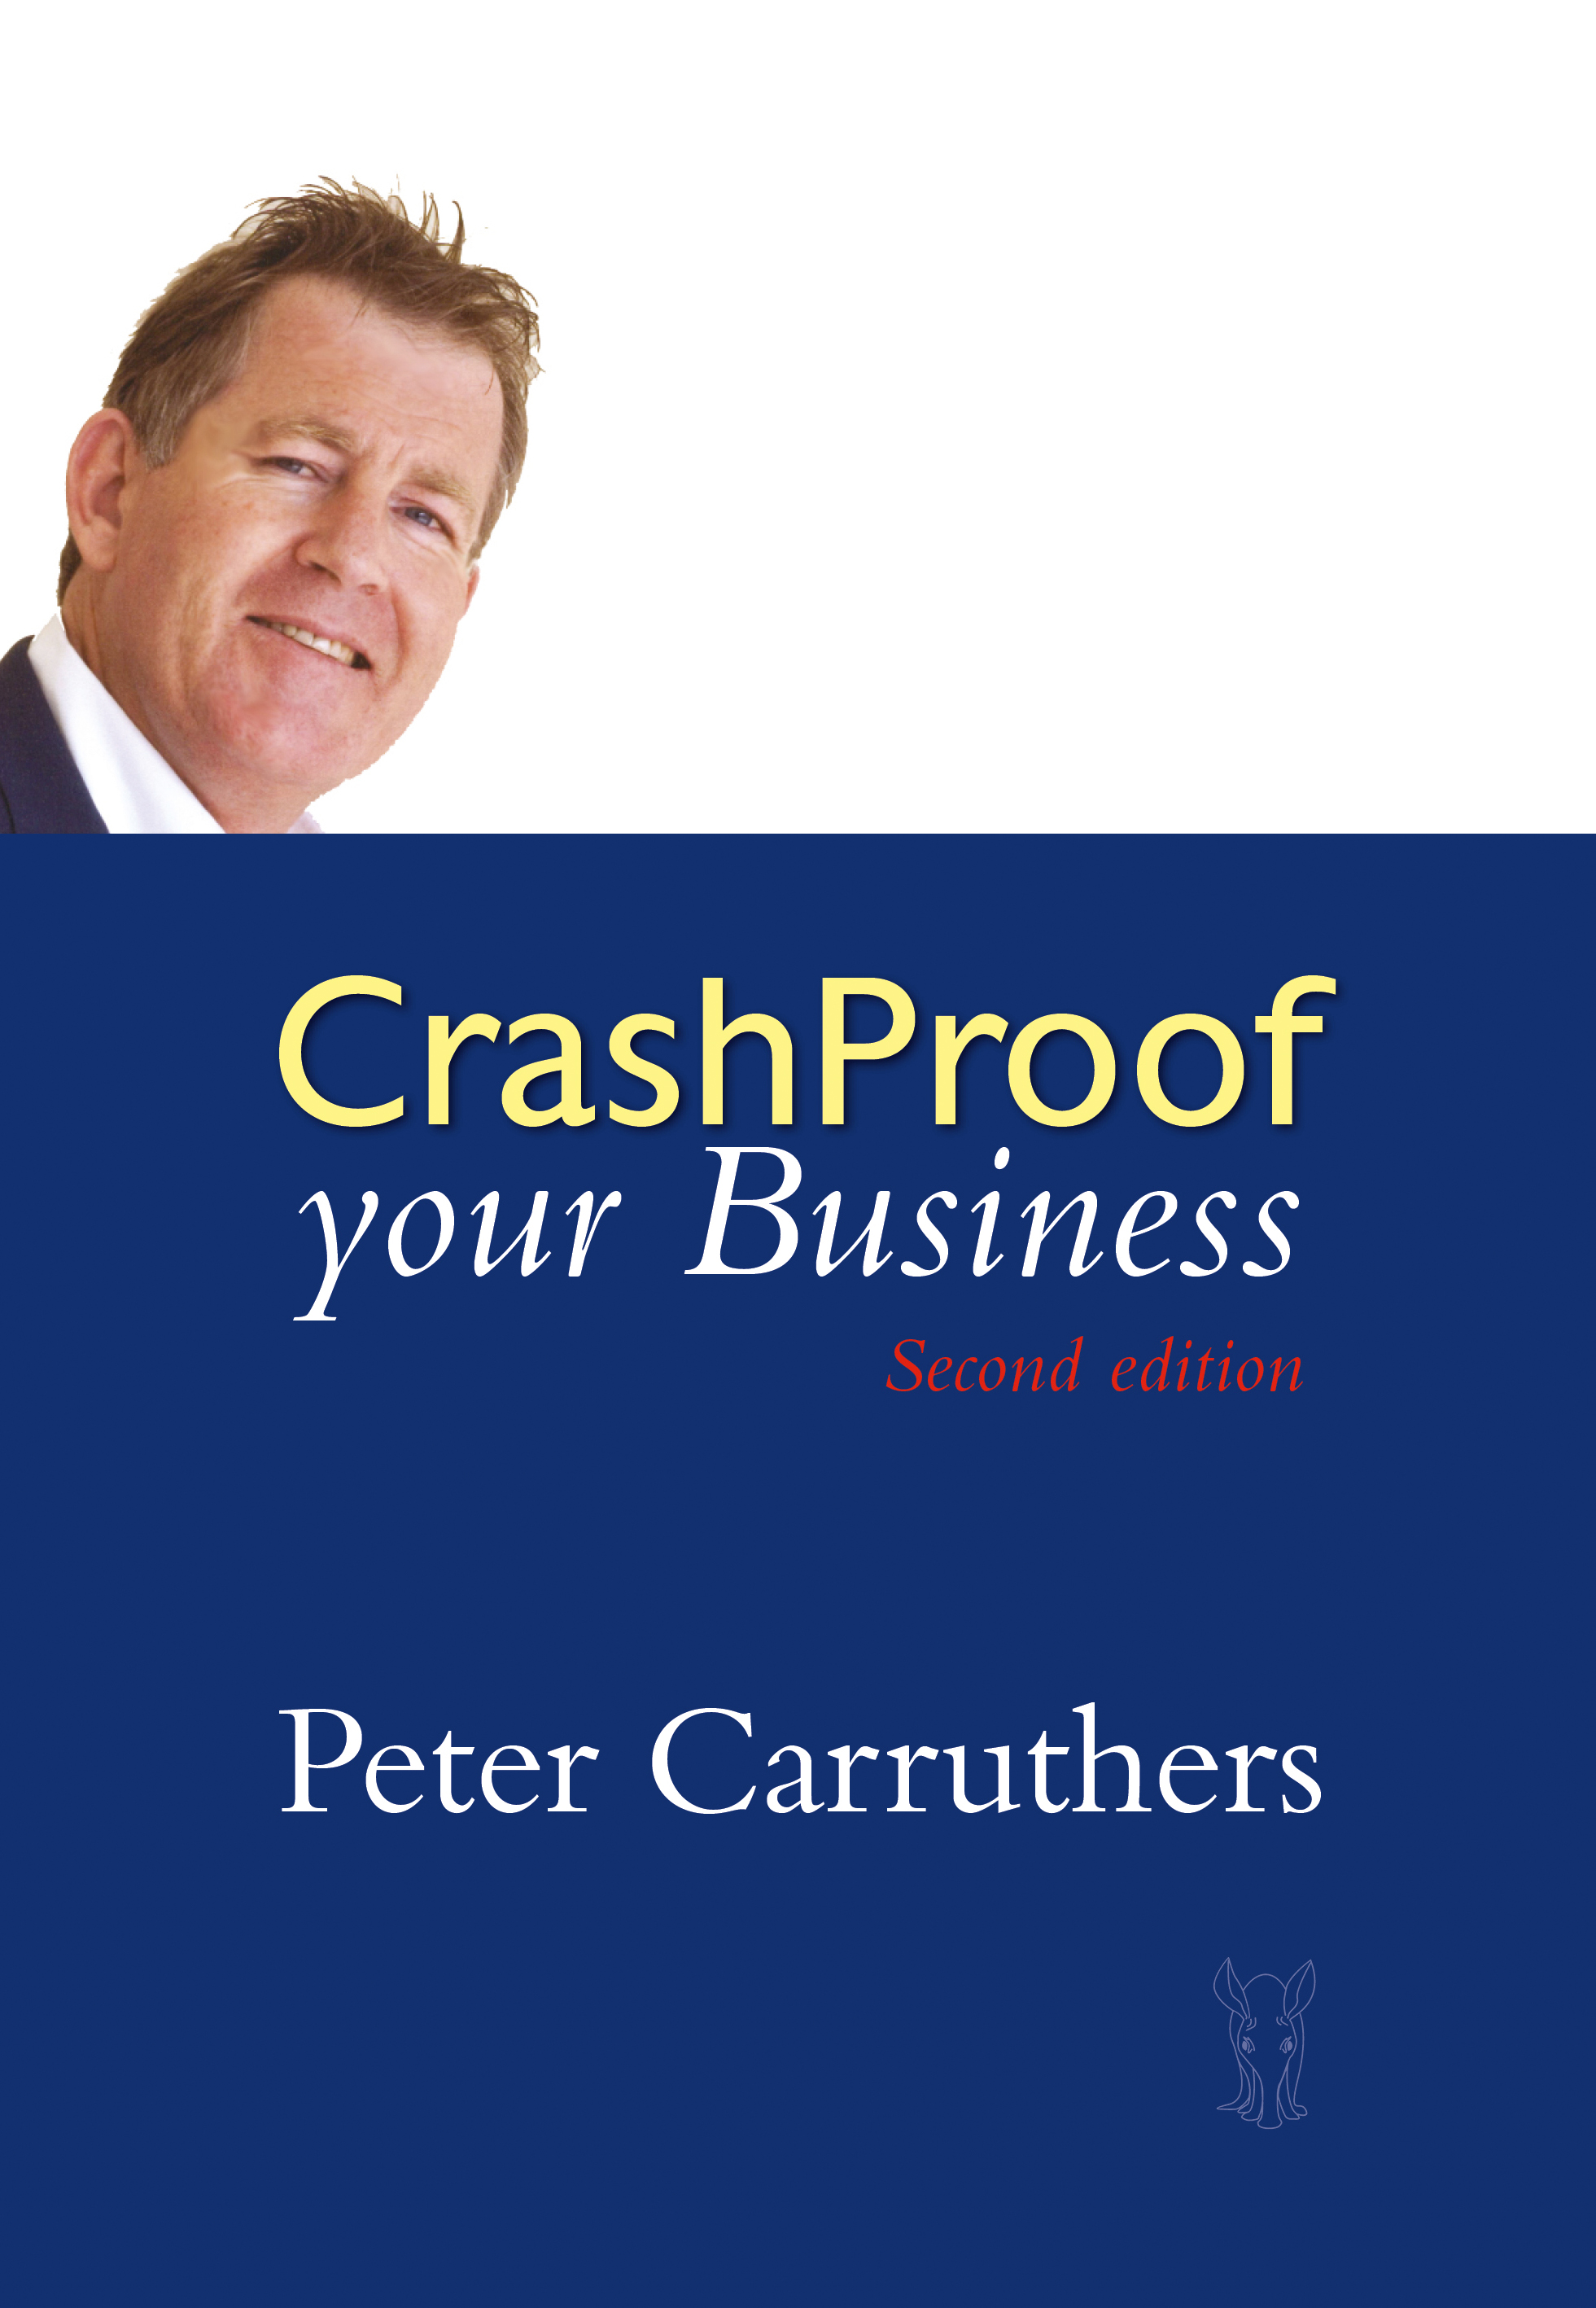 Cover Image Crashproof your Business 2nd edition